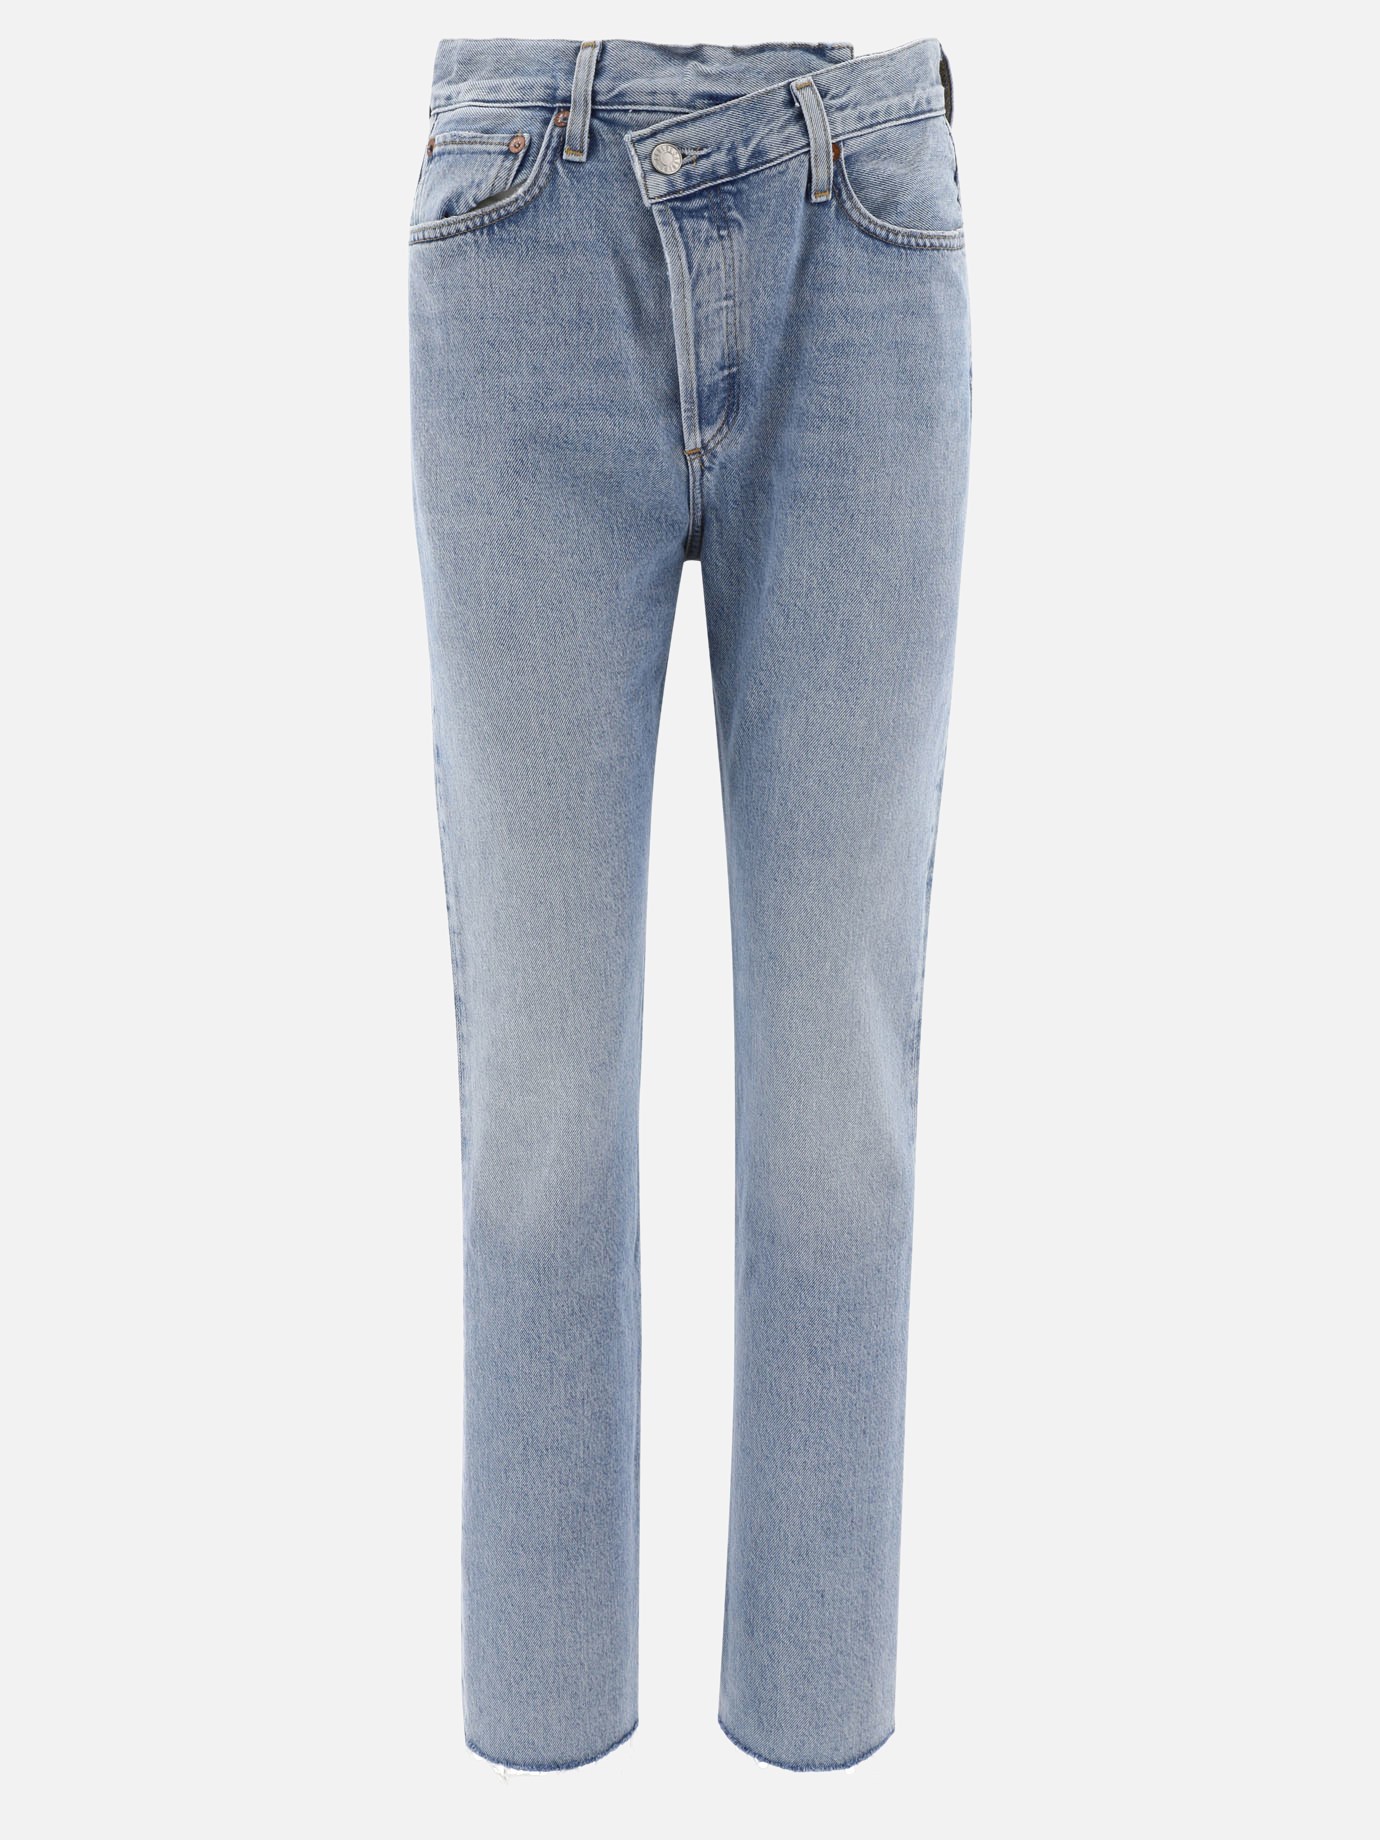 Jeans  Criss Cross by Agolde - 2